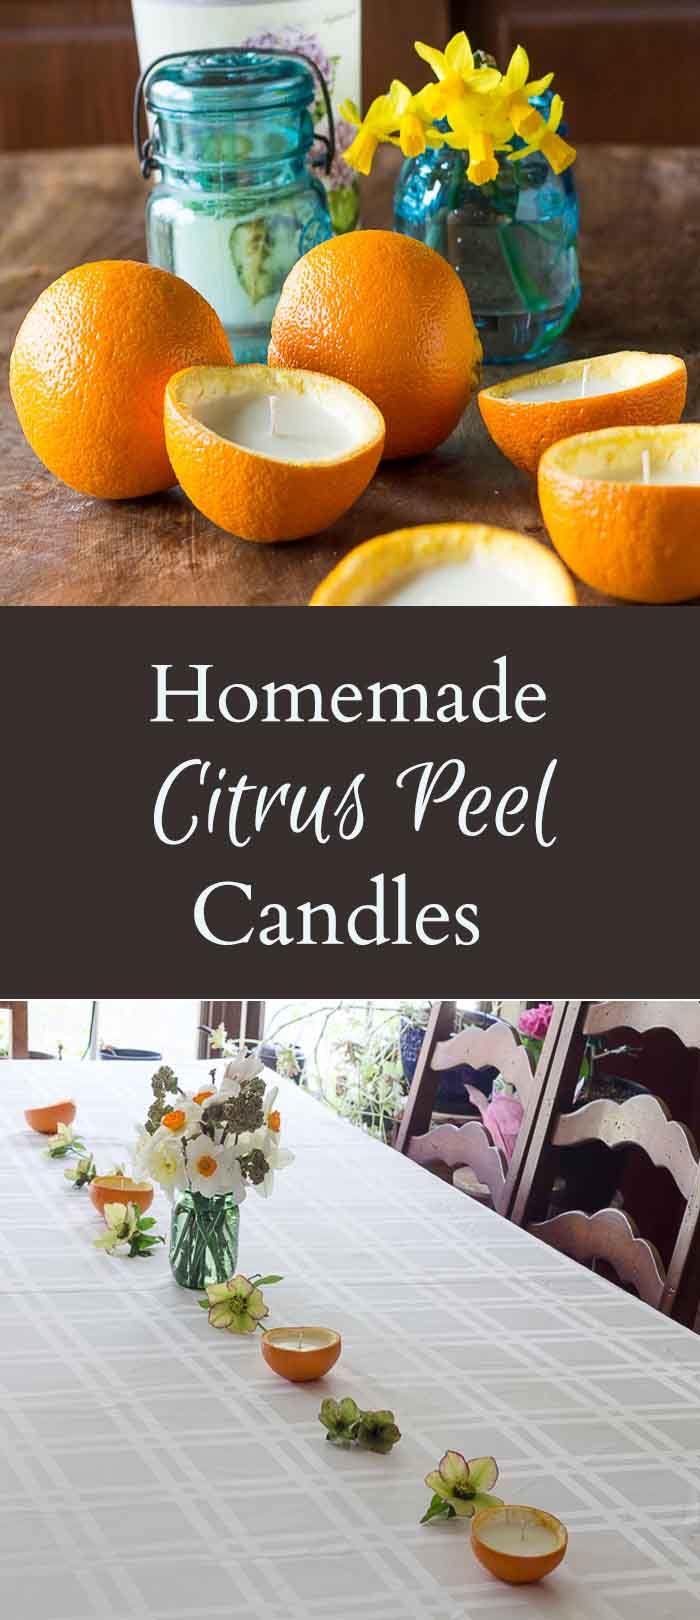 DIY Candles - Easily Made from Orange Peels